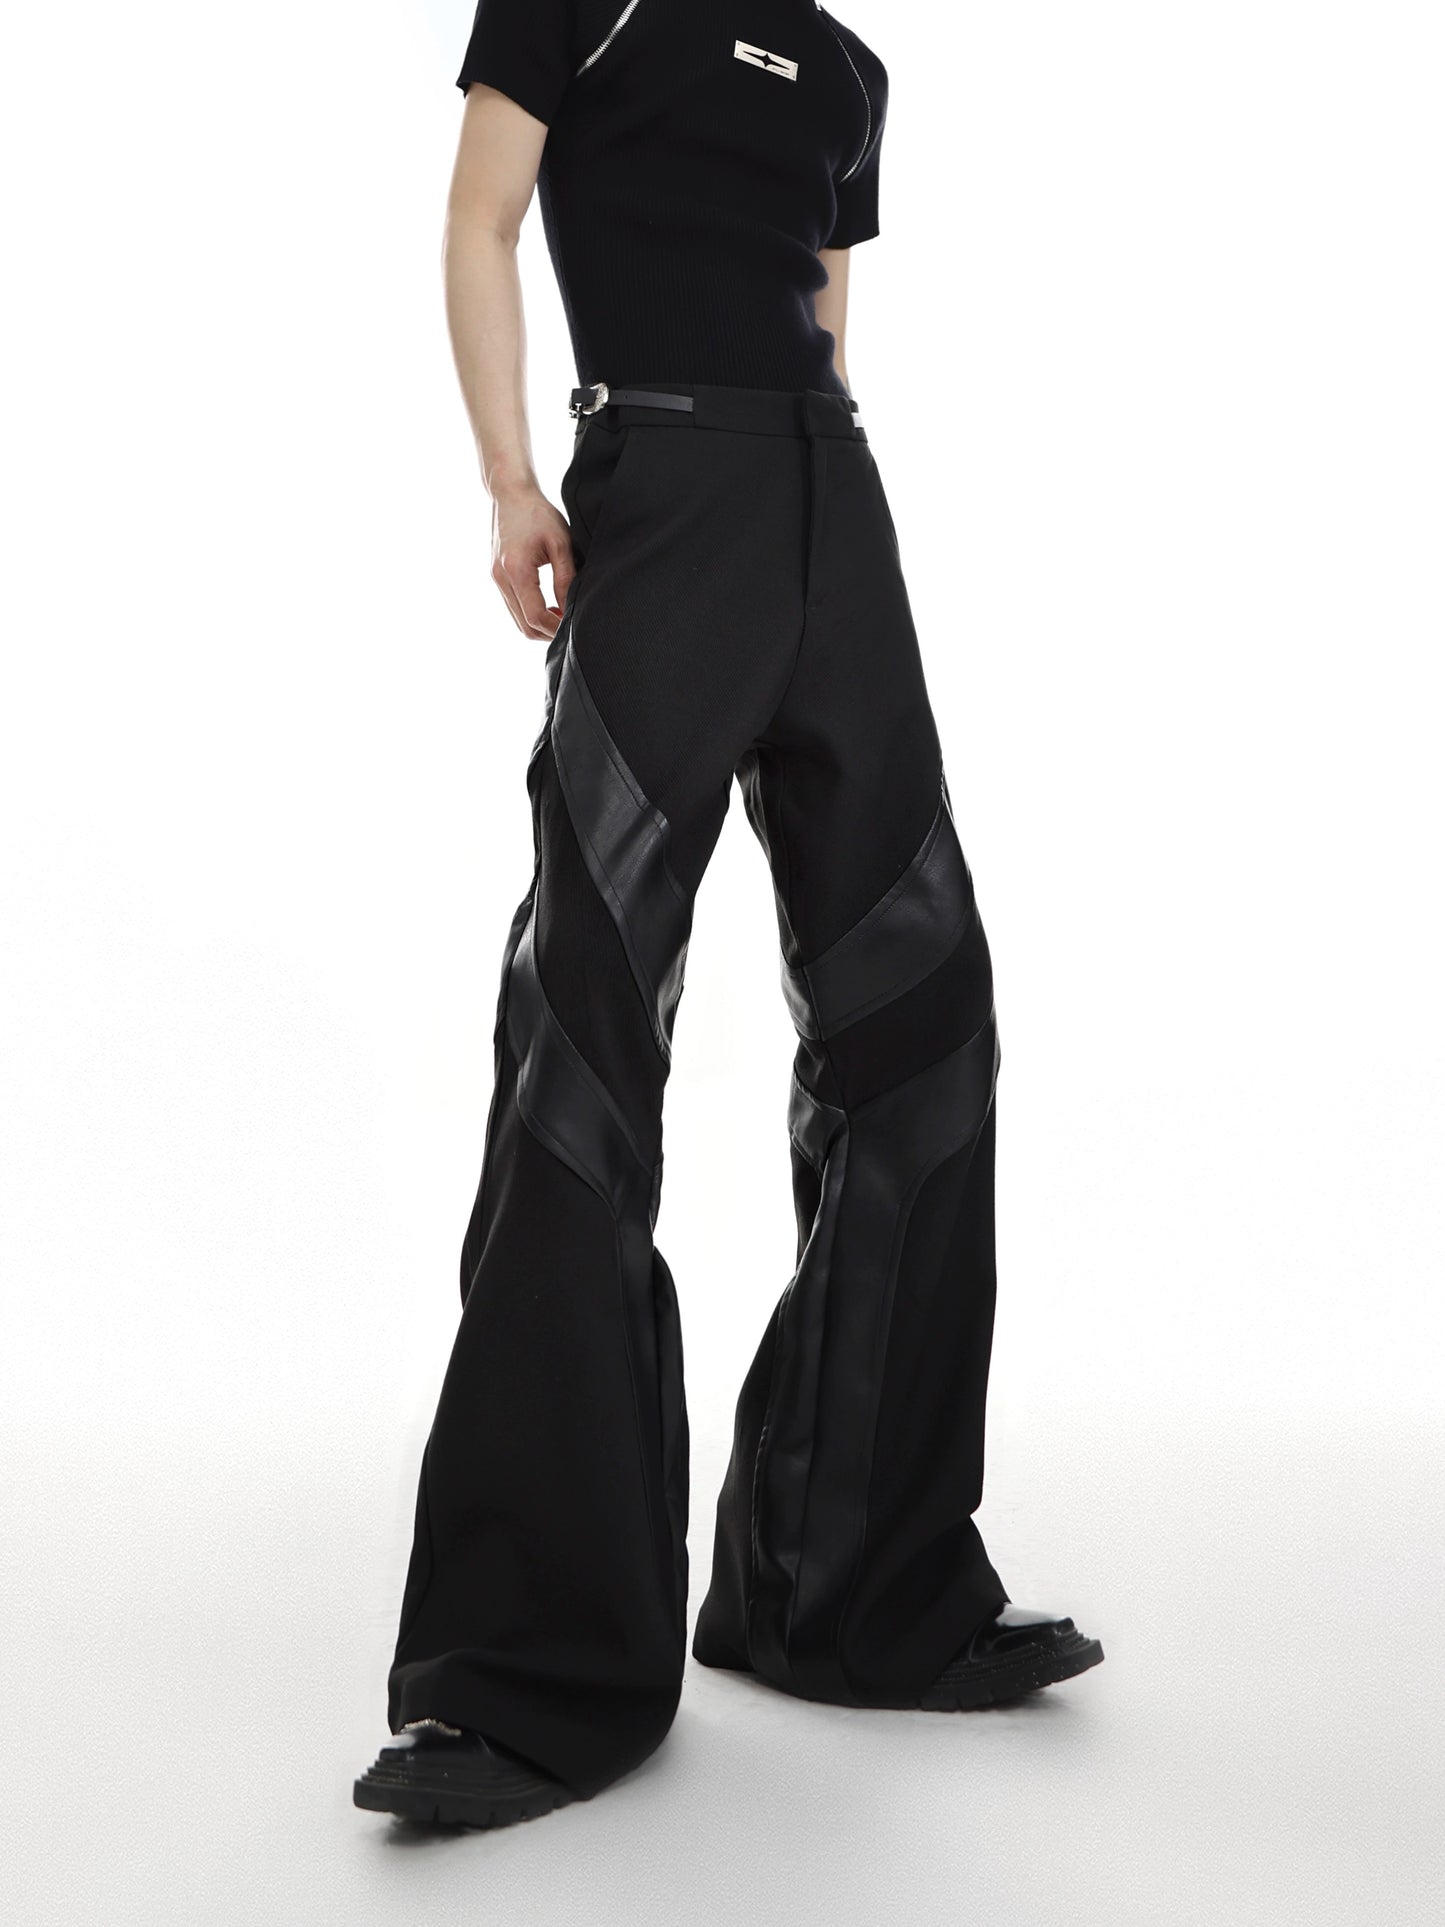 CulturE niche deconstructs spliced micro-flared trousers, belt buckle design sense casual pants, three-dimensional striped trousers